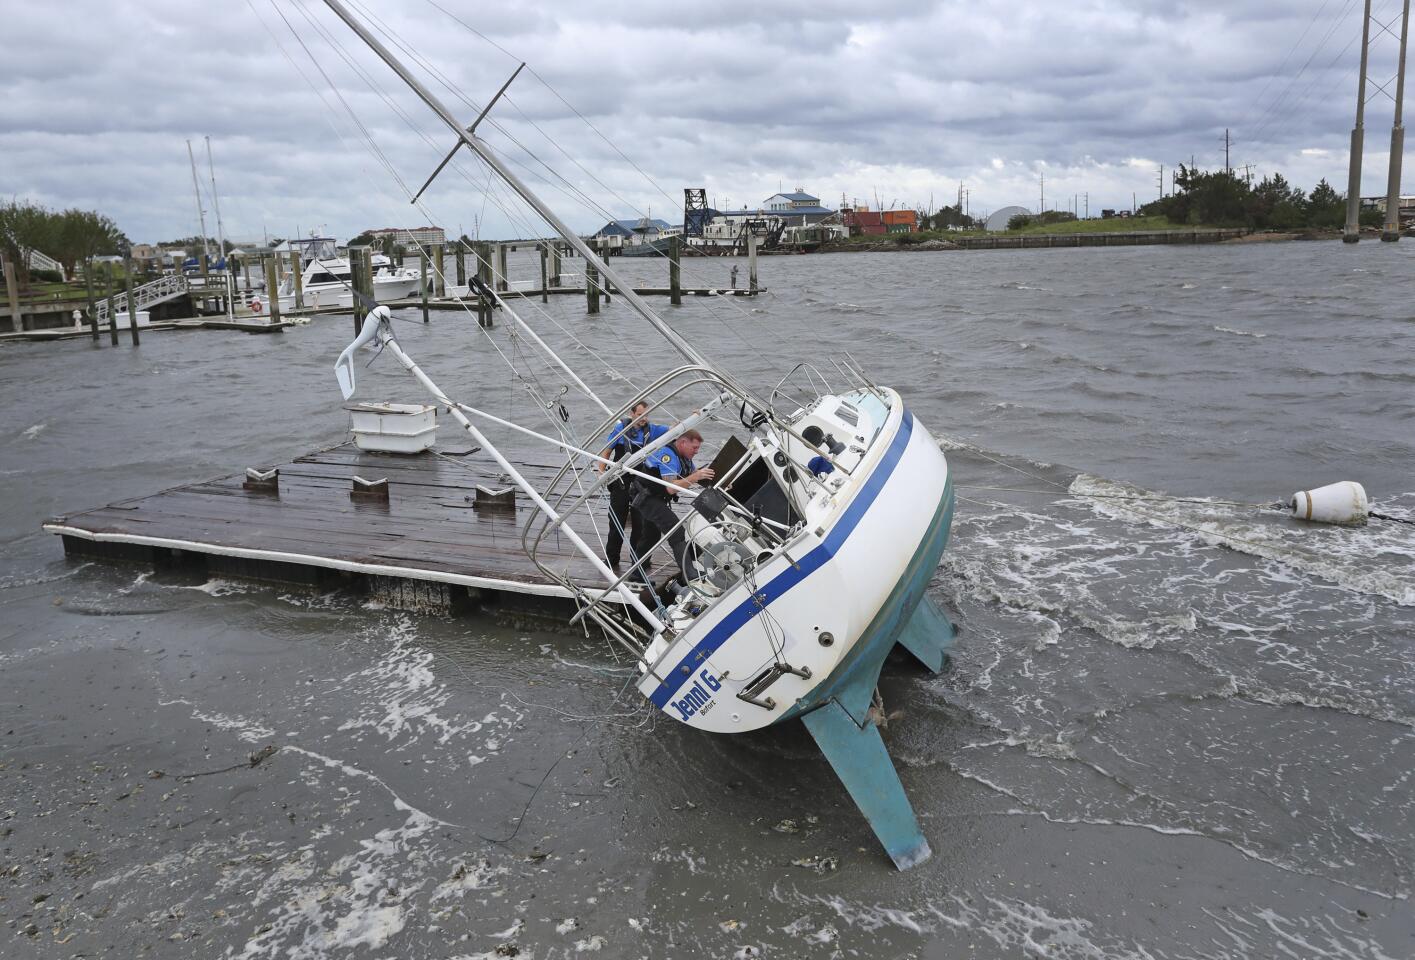 Beaufort Police Officer Curtis Resor, left, and Sgt. Micheal Stepehens check a sailboat for occupants in Beaufort, N.C. after Hurricane Dorian passed the North Carolina coast on Friday, Sept. 6, 2019. Dorian howled over North Carolina's Outer Banks on Friday — a much weaker but still dangerous version of the storm that wreaked havoc in the Bahamas — flooding homes in the low-lying ribbon of islands and throwing a scare into year-round residents who tried to tough it out. (AP Photo/Tom Copeland)